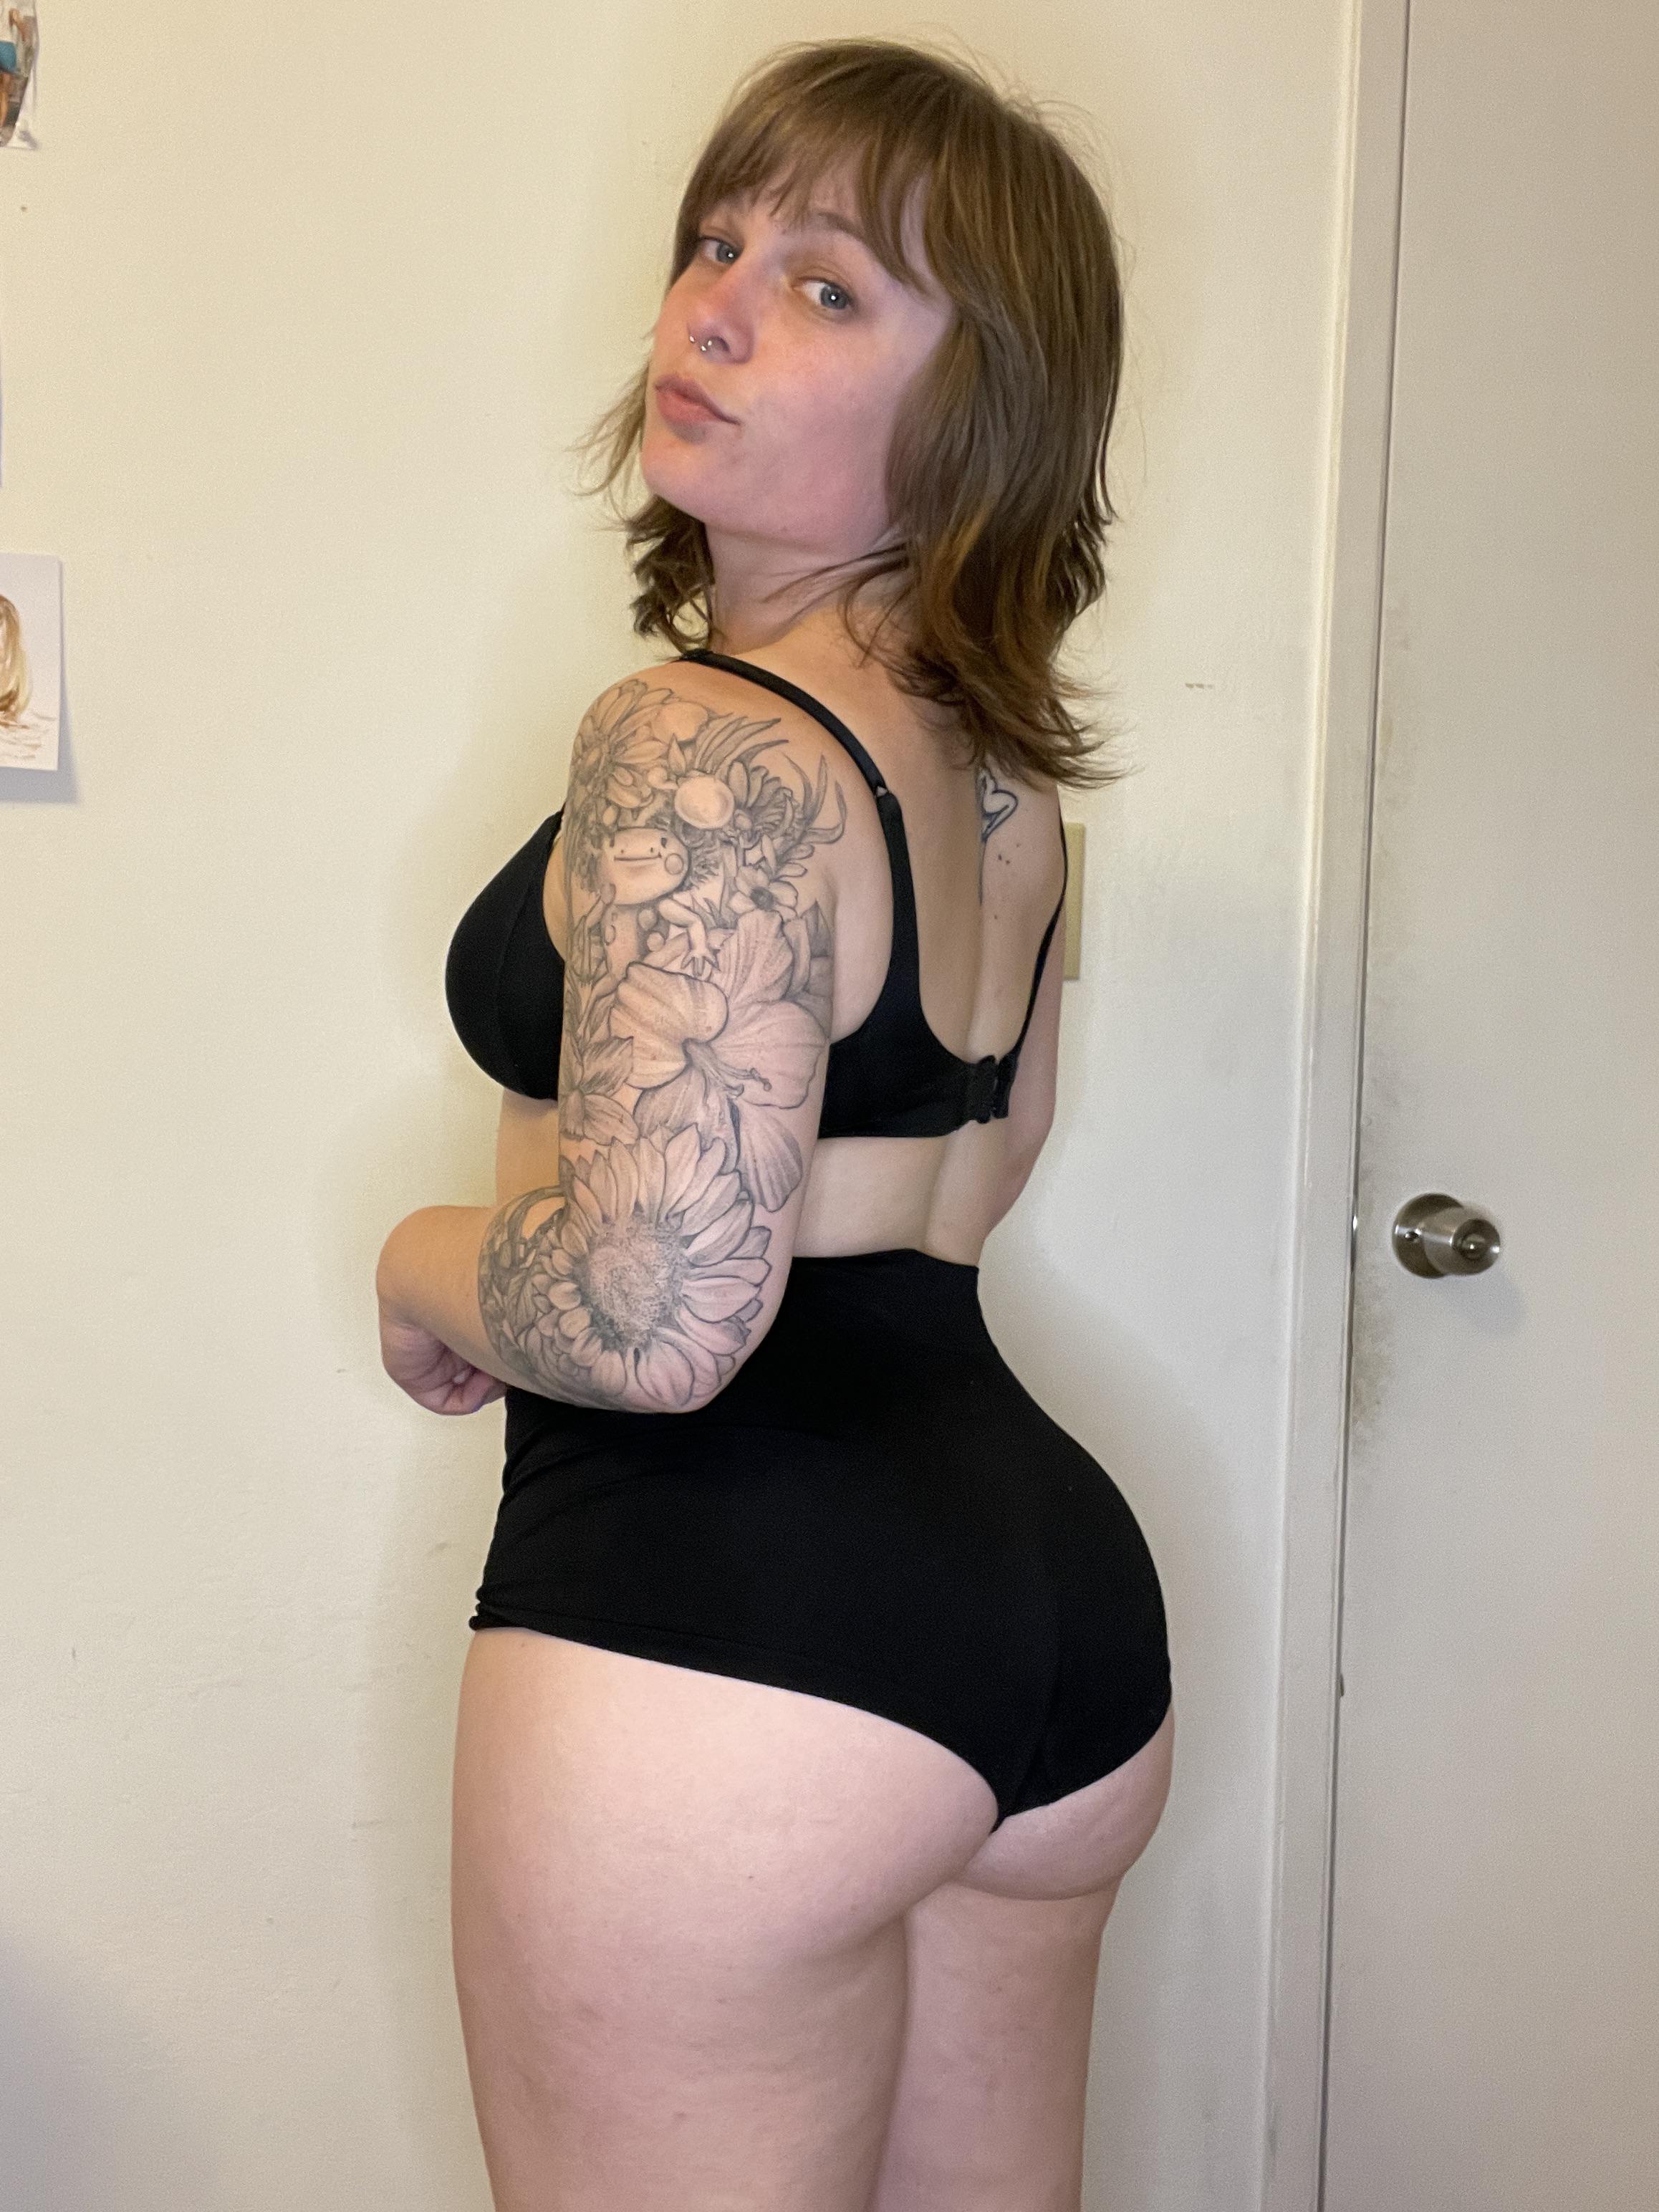 PAWG Too big for my body or proportional